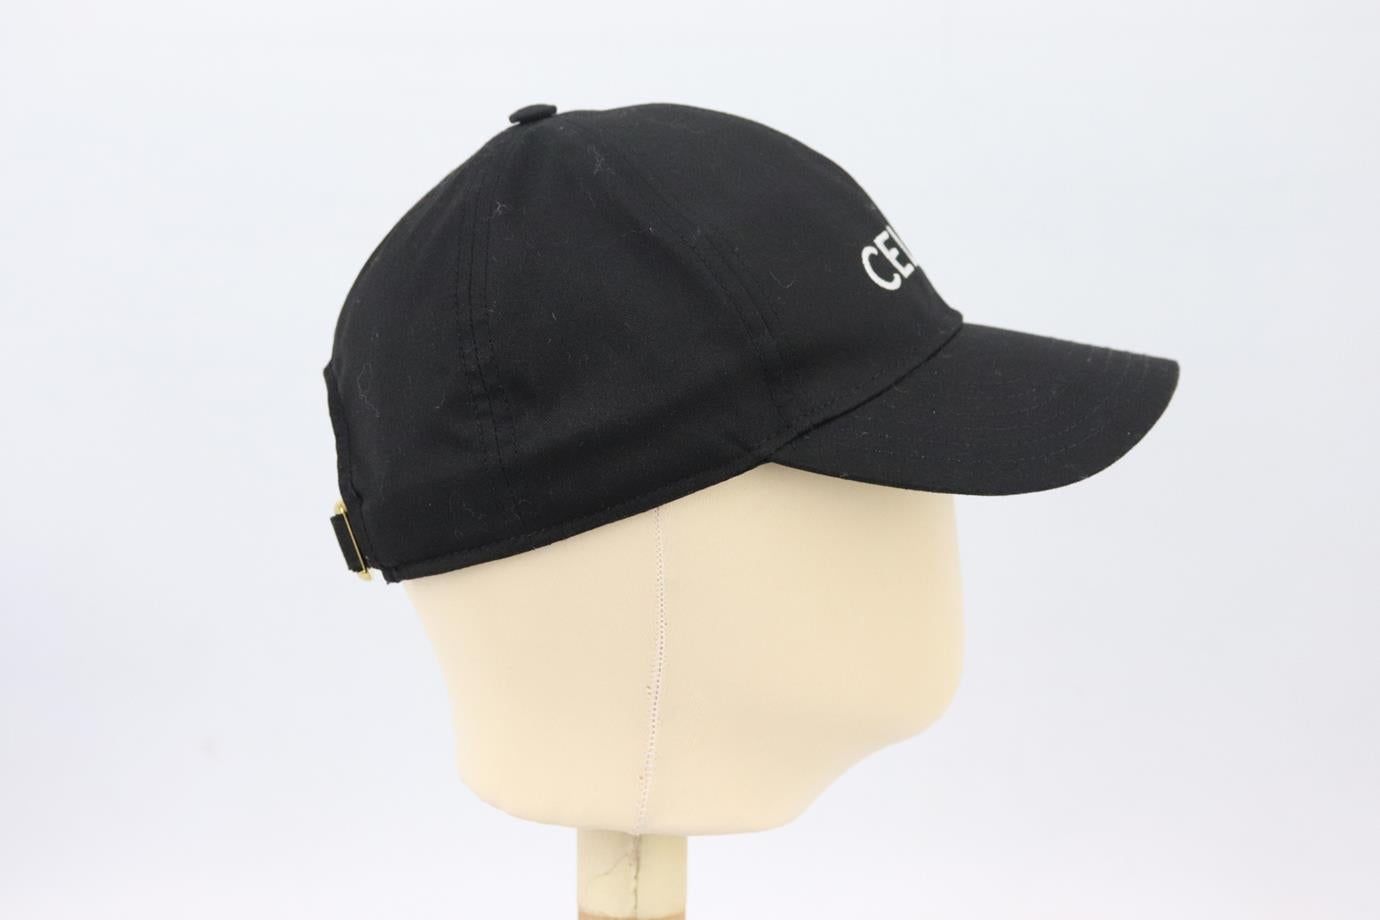 Celine embroidered cotton twill baseball cap. Made from black cotton-twill with white logo-embroidery on the front. Black. Buckle fastening at back. 65% Polyester, 35% cotton. Size: One Size. Brim Depth: 2.75 in. Circumference: 21.4 in